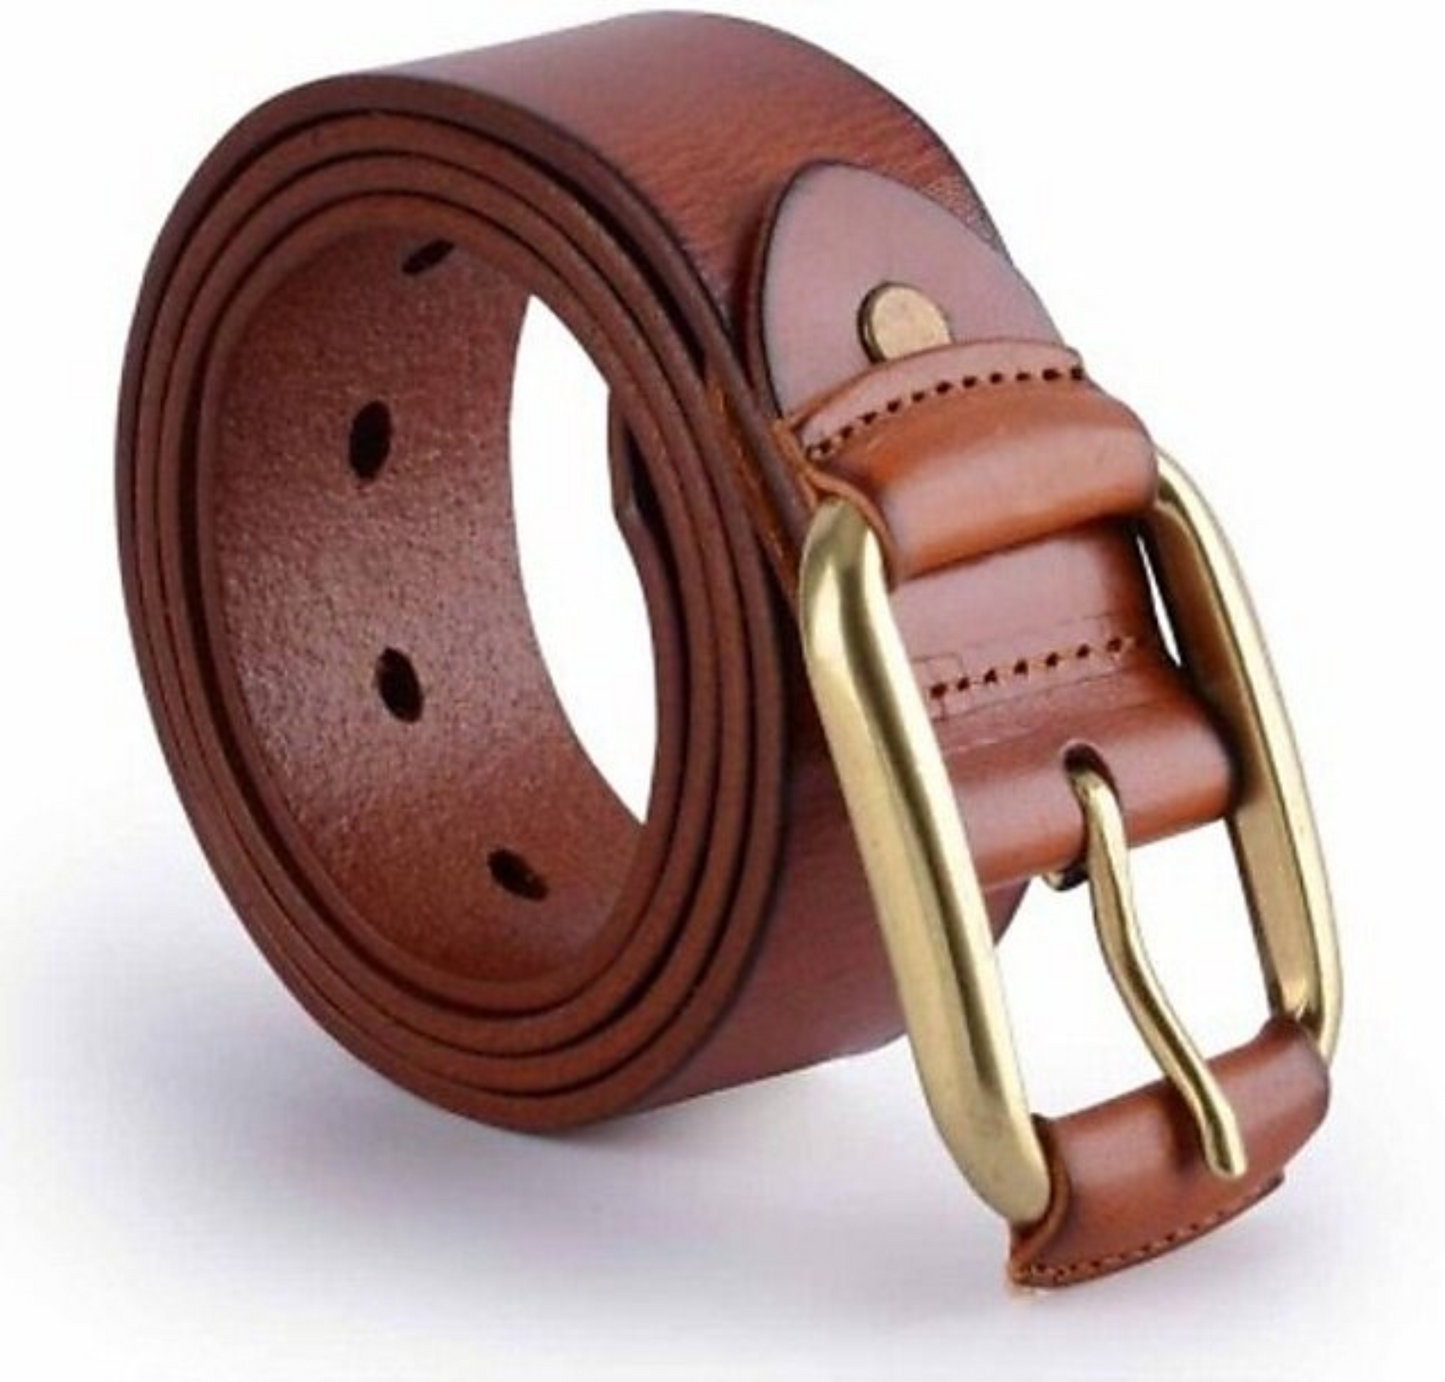 Sensy Gifts High Quality Material Belt